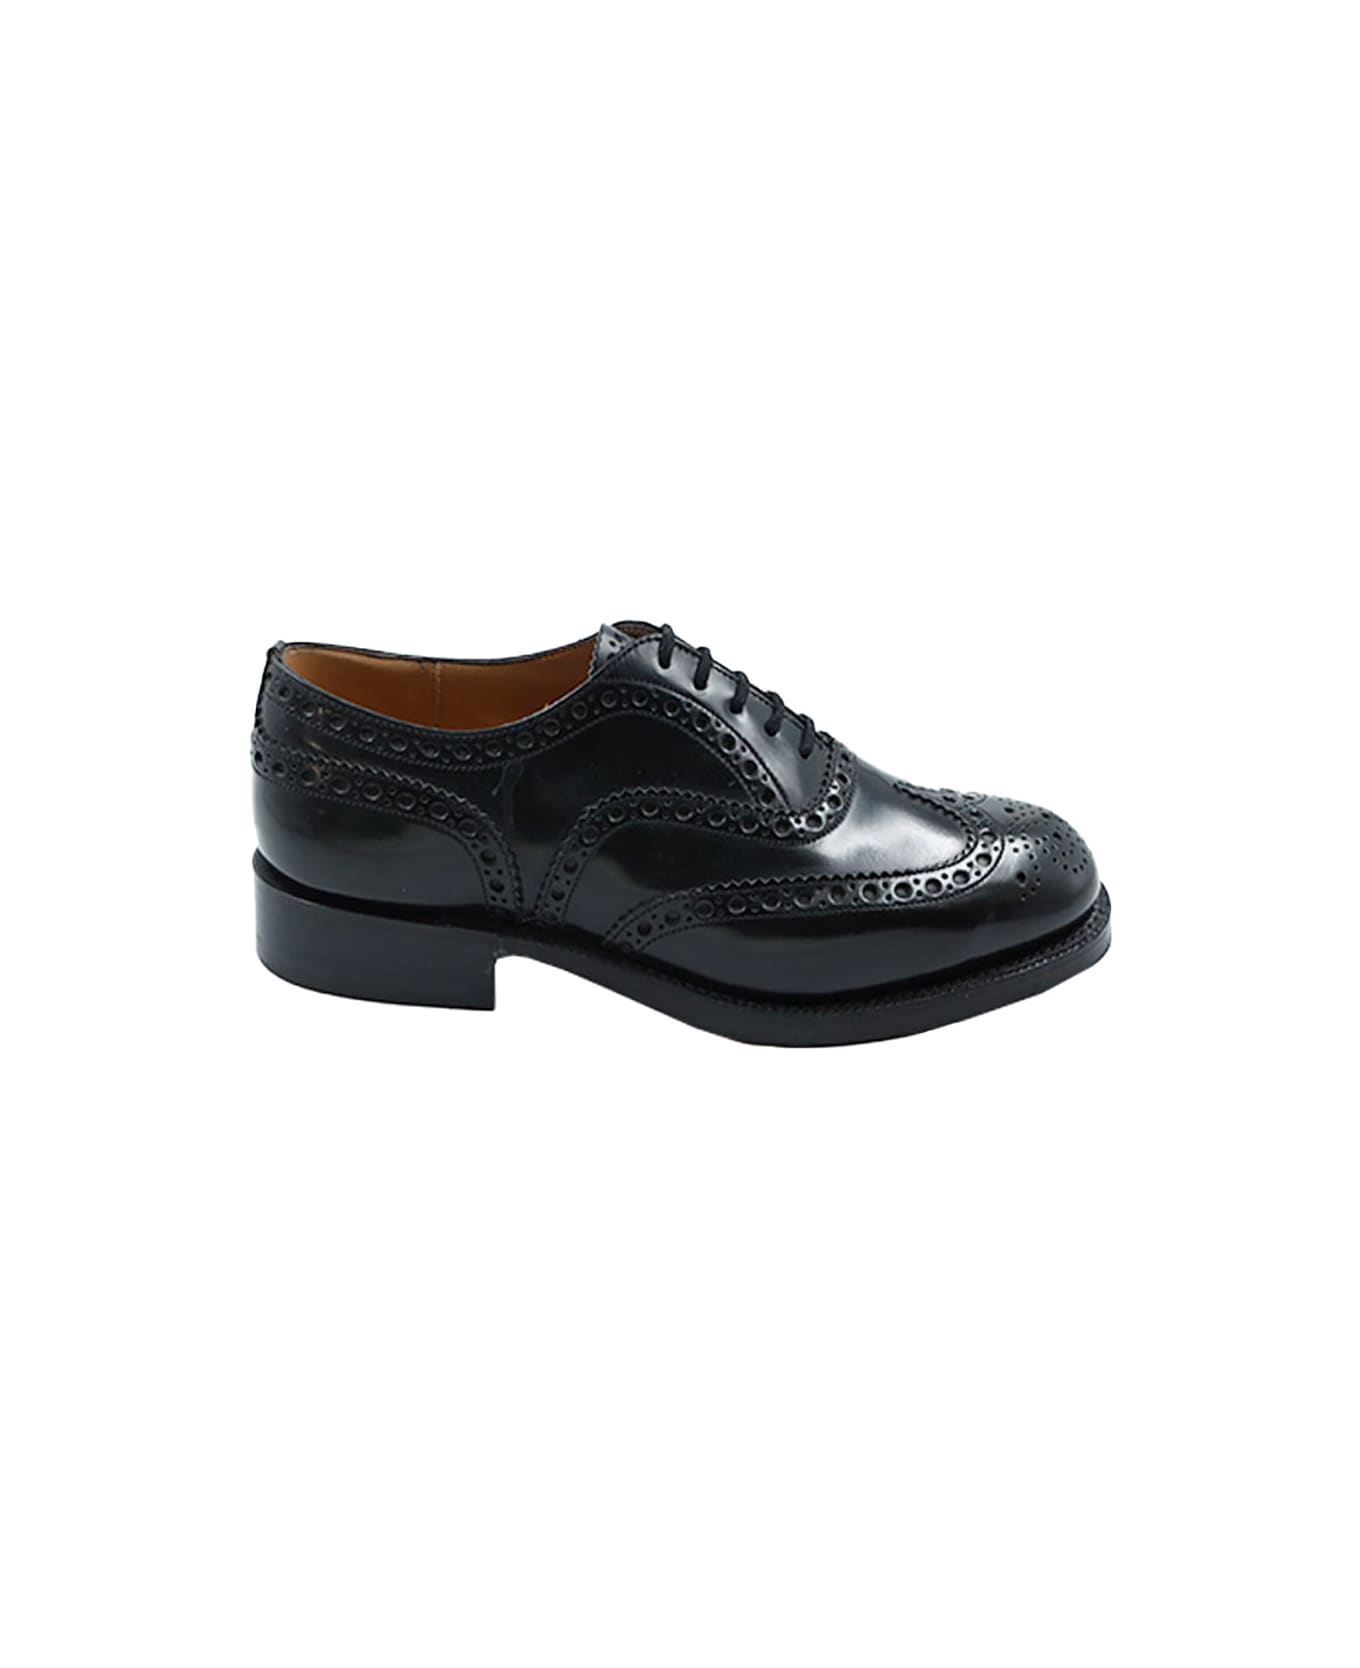 Church's Full Brogue Lace-up Oxford - Black